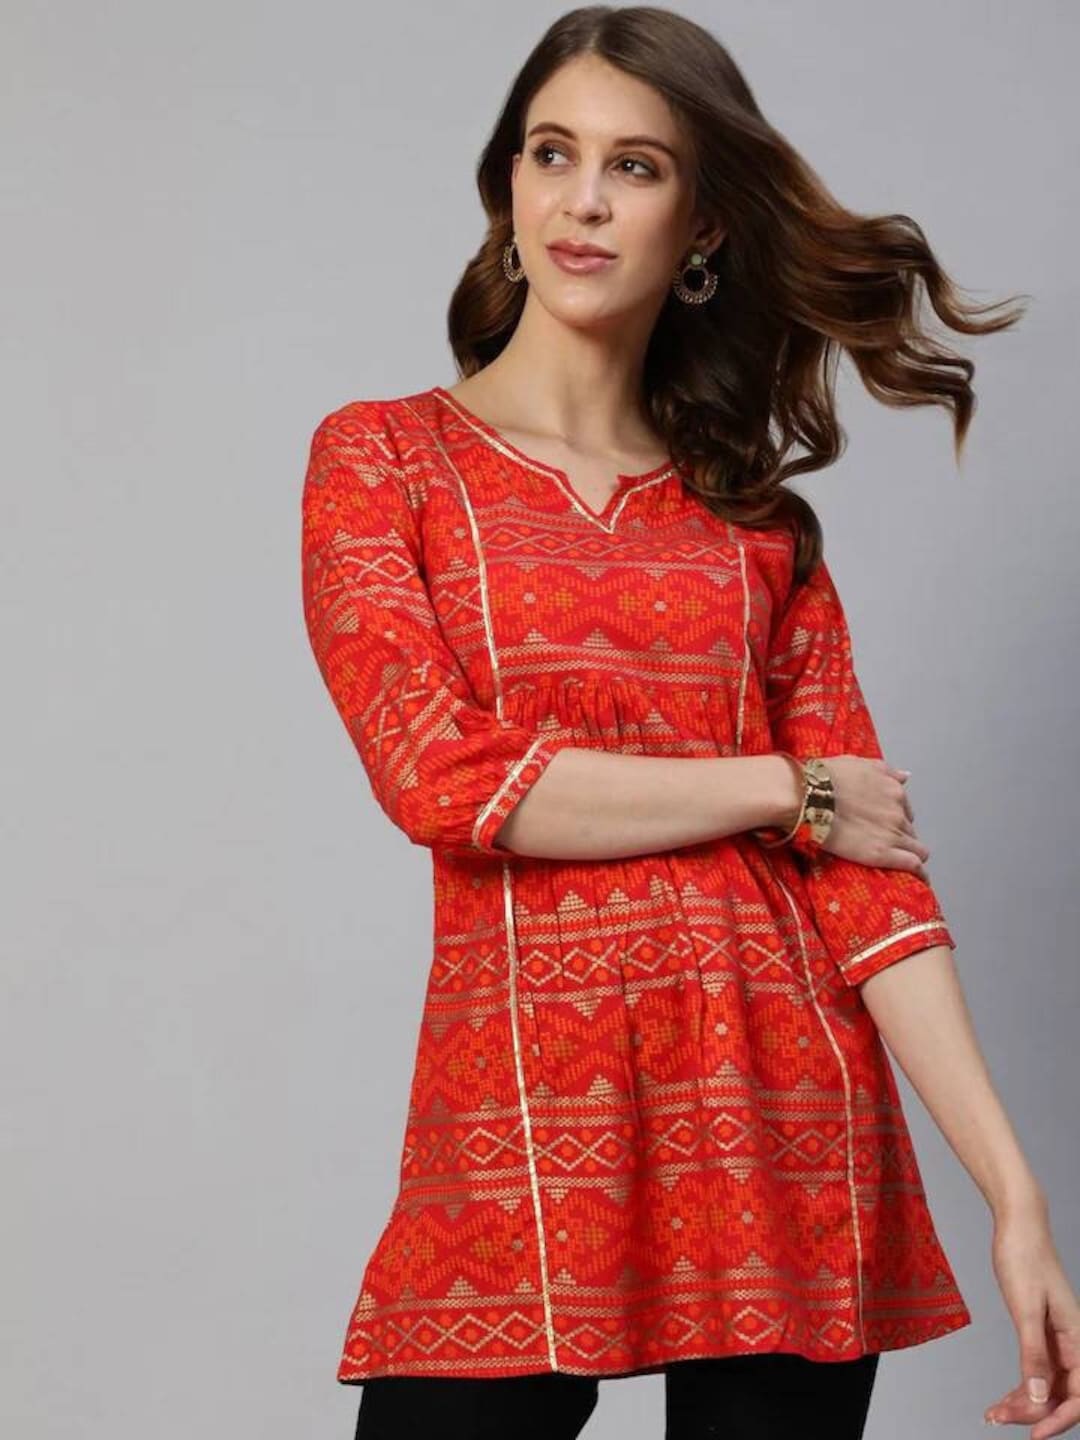 Best Selling Low Rates Daily Wear Rayon Cotton Tops/kurti for Woman and  Girls at Rs 199 | stylish rayon kurti with paint in Surat | ID: 27107304533